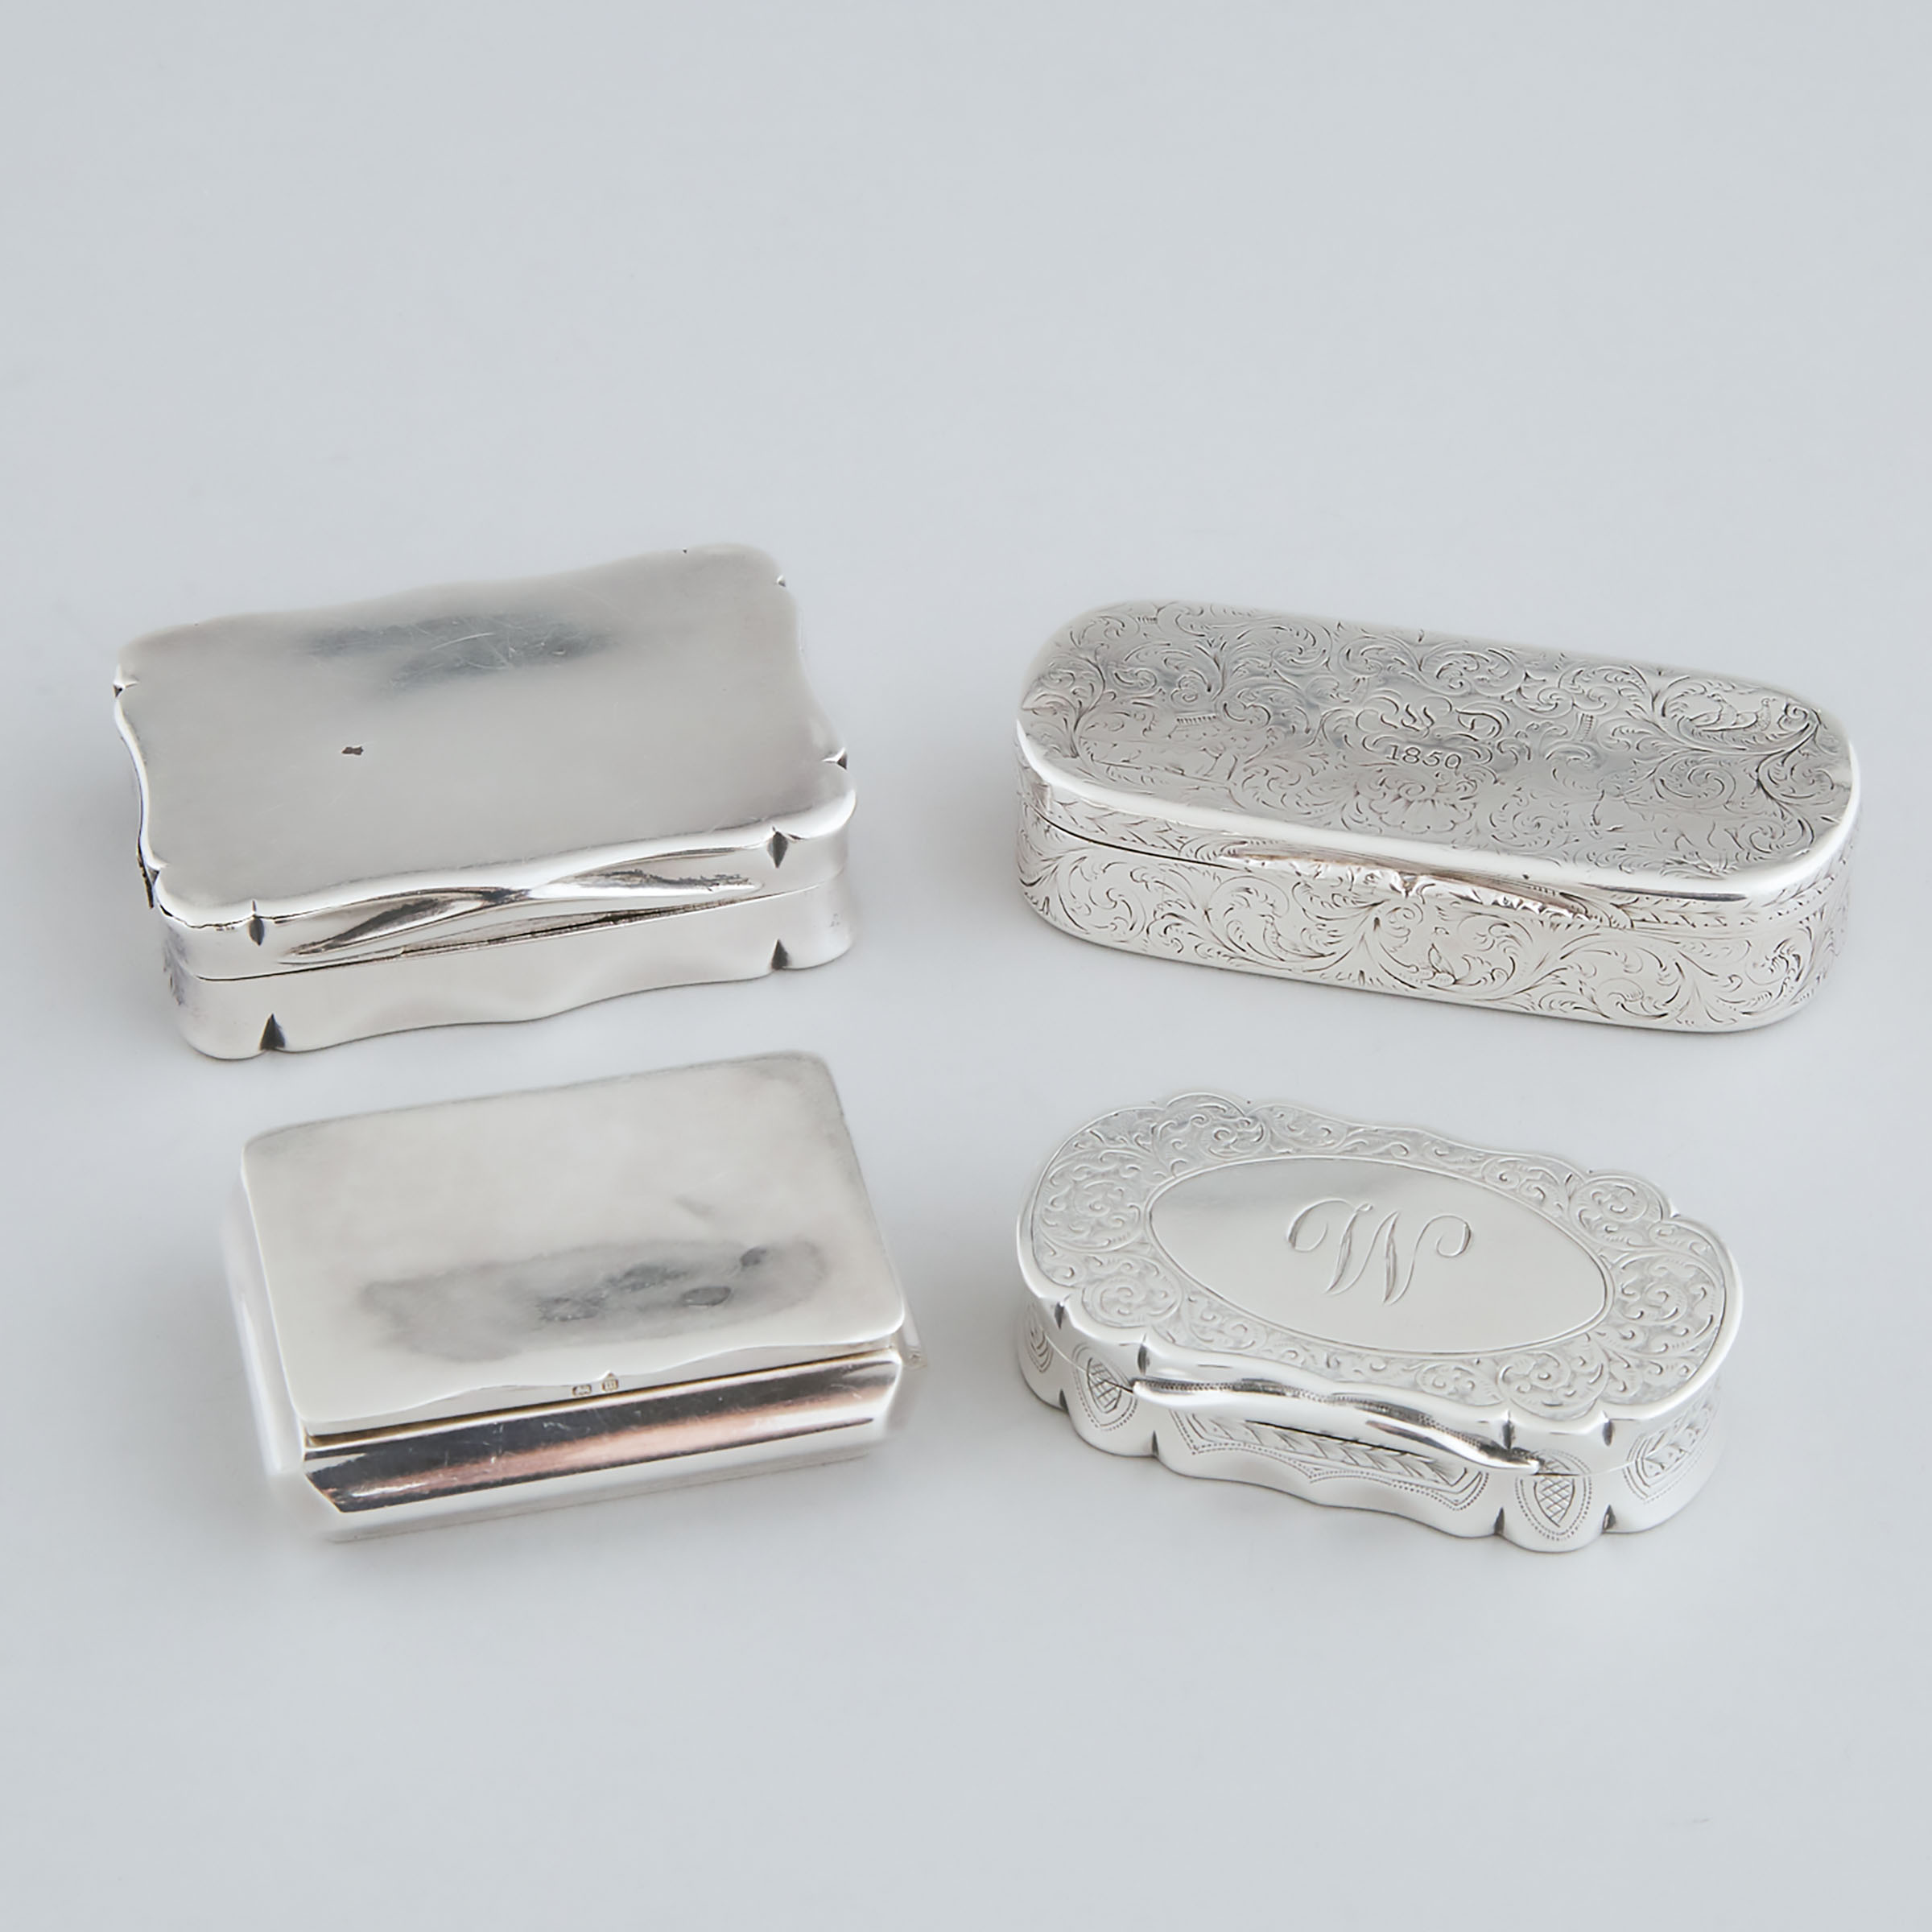 Four Victorian, Edwardian and Later Silver Snuff Boxes, Birmingham and Chester, c.1839-1916